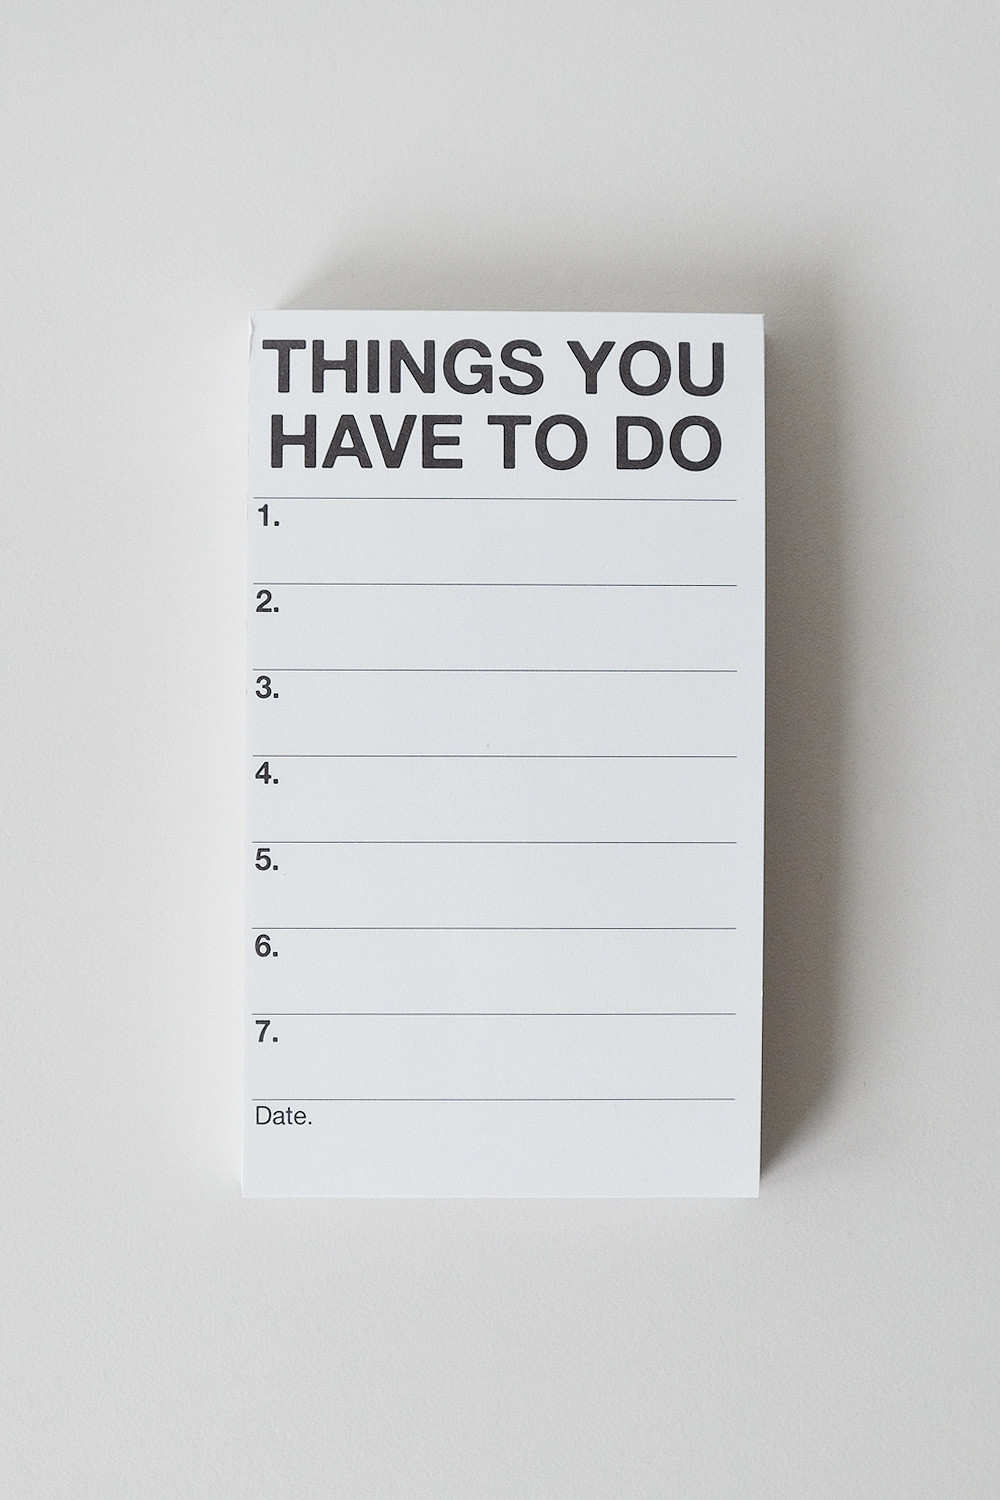 (70x120) THINGS YOU HAVE TO DO